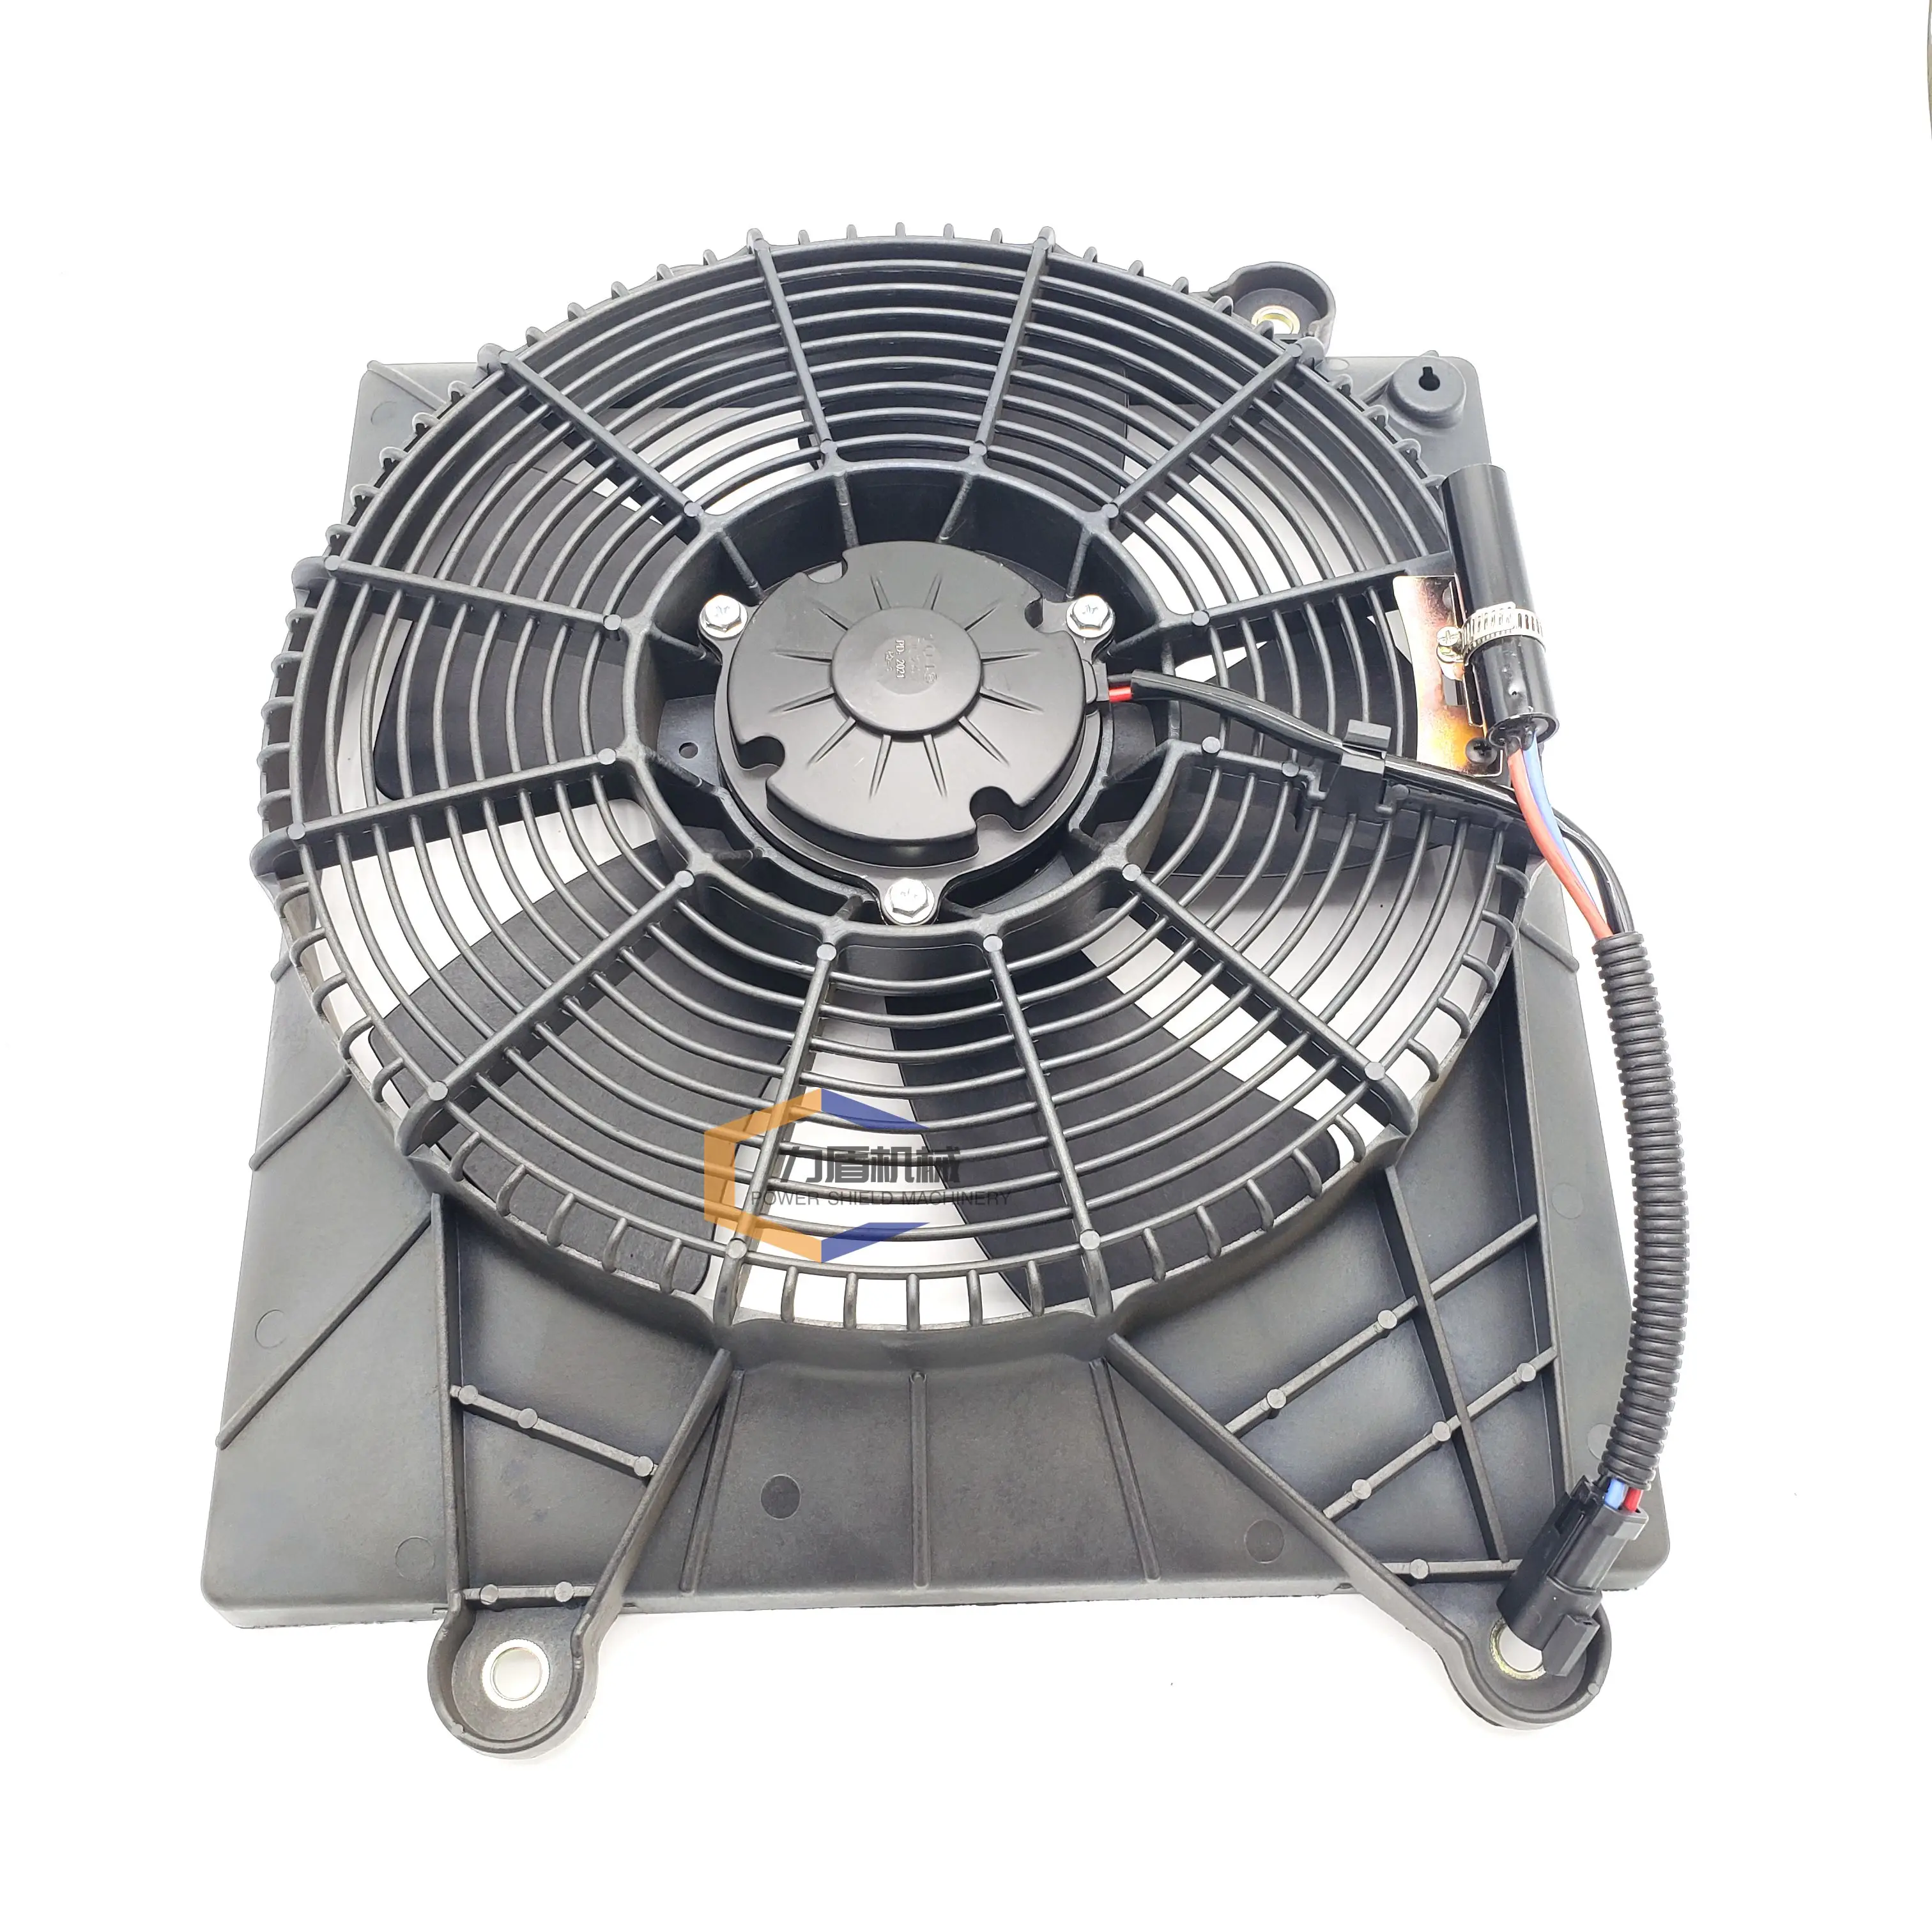 

For Caterpillar 323 324 329 330 336d Excavator Air Conditioning Electronic Fan Cooling Fan Excavator Parts